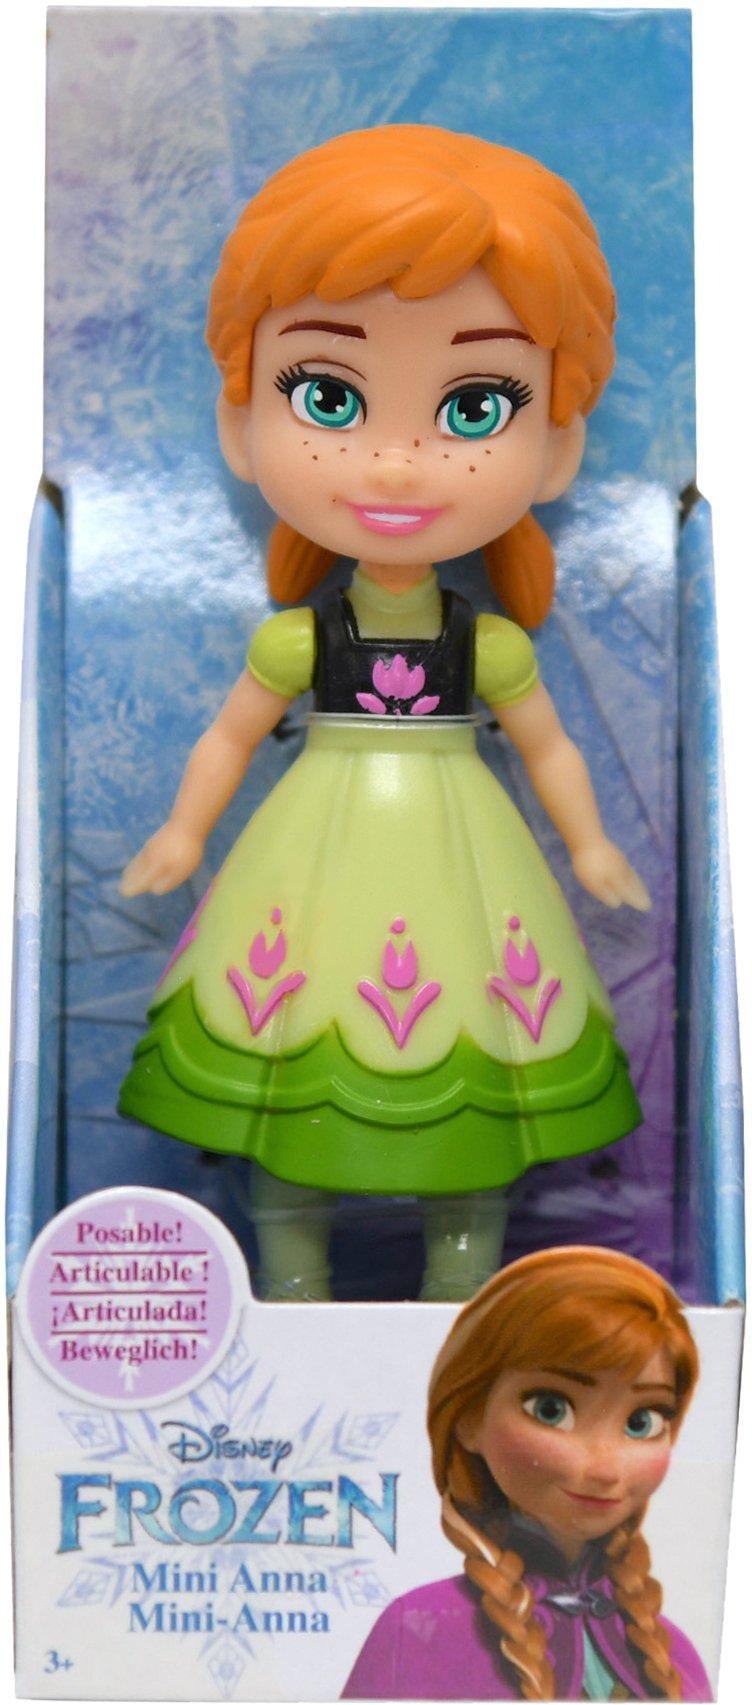 2017 Disney Frozen Mini Toddler Young Anna Release for sale online 